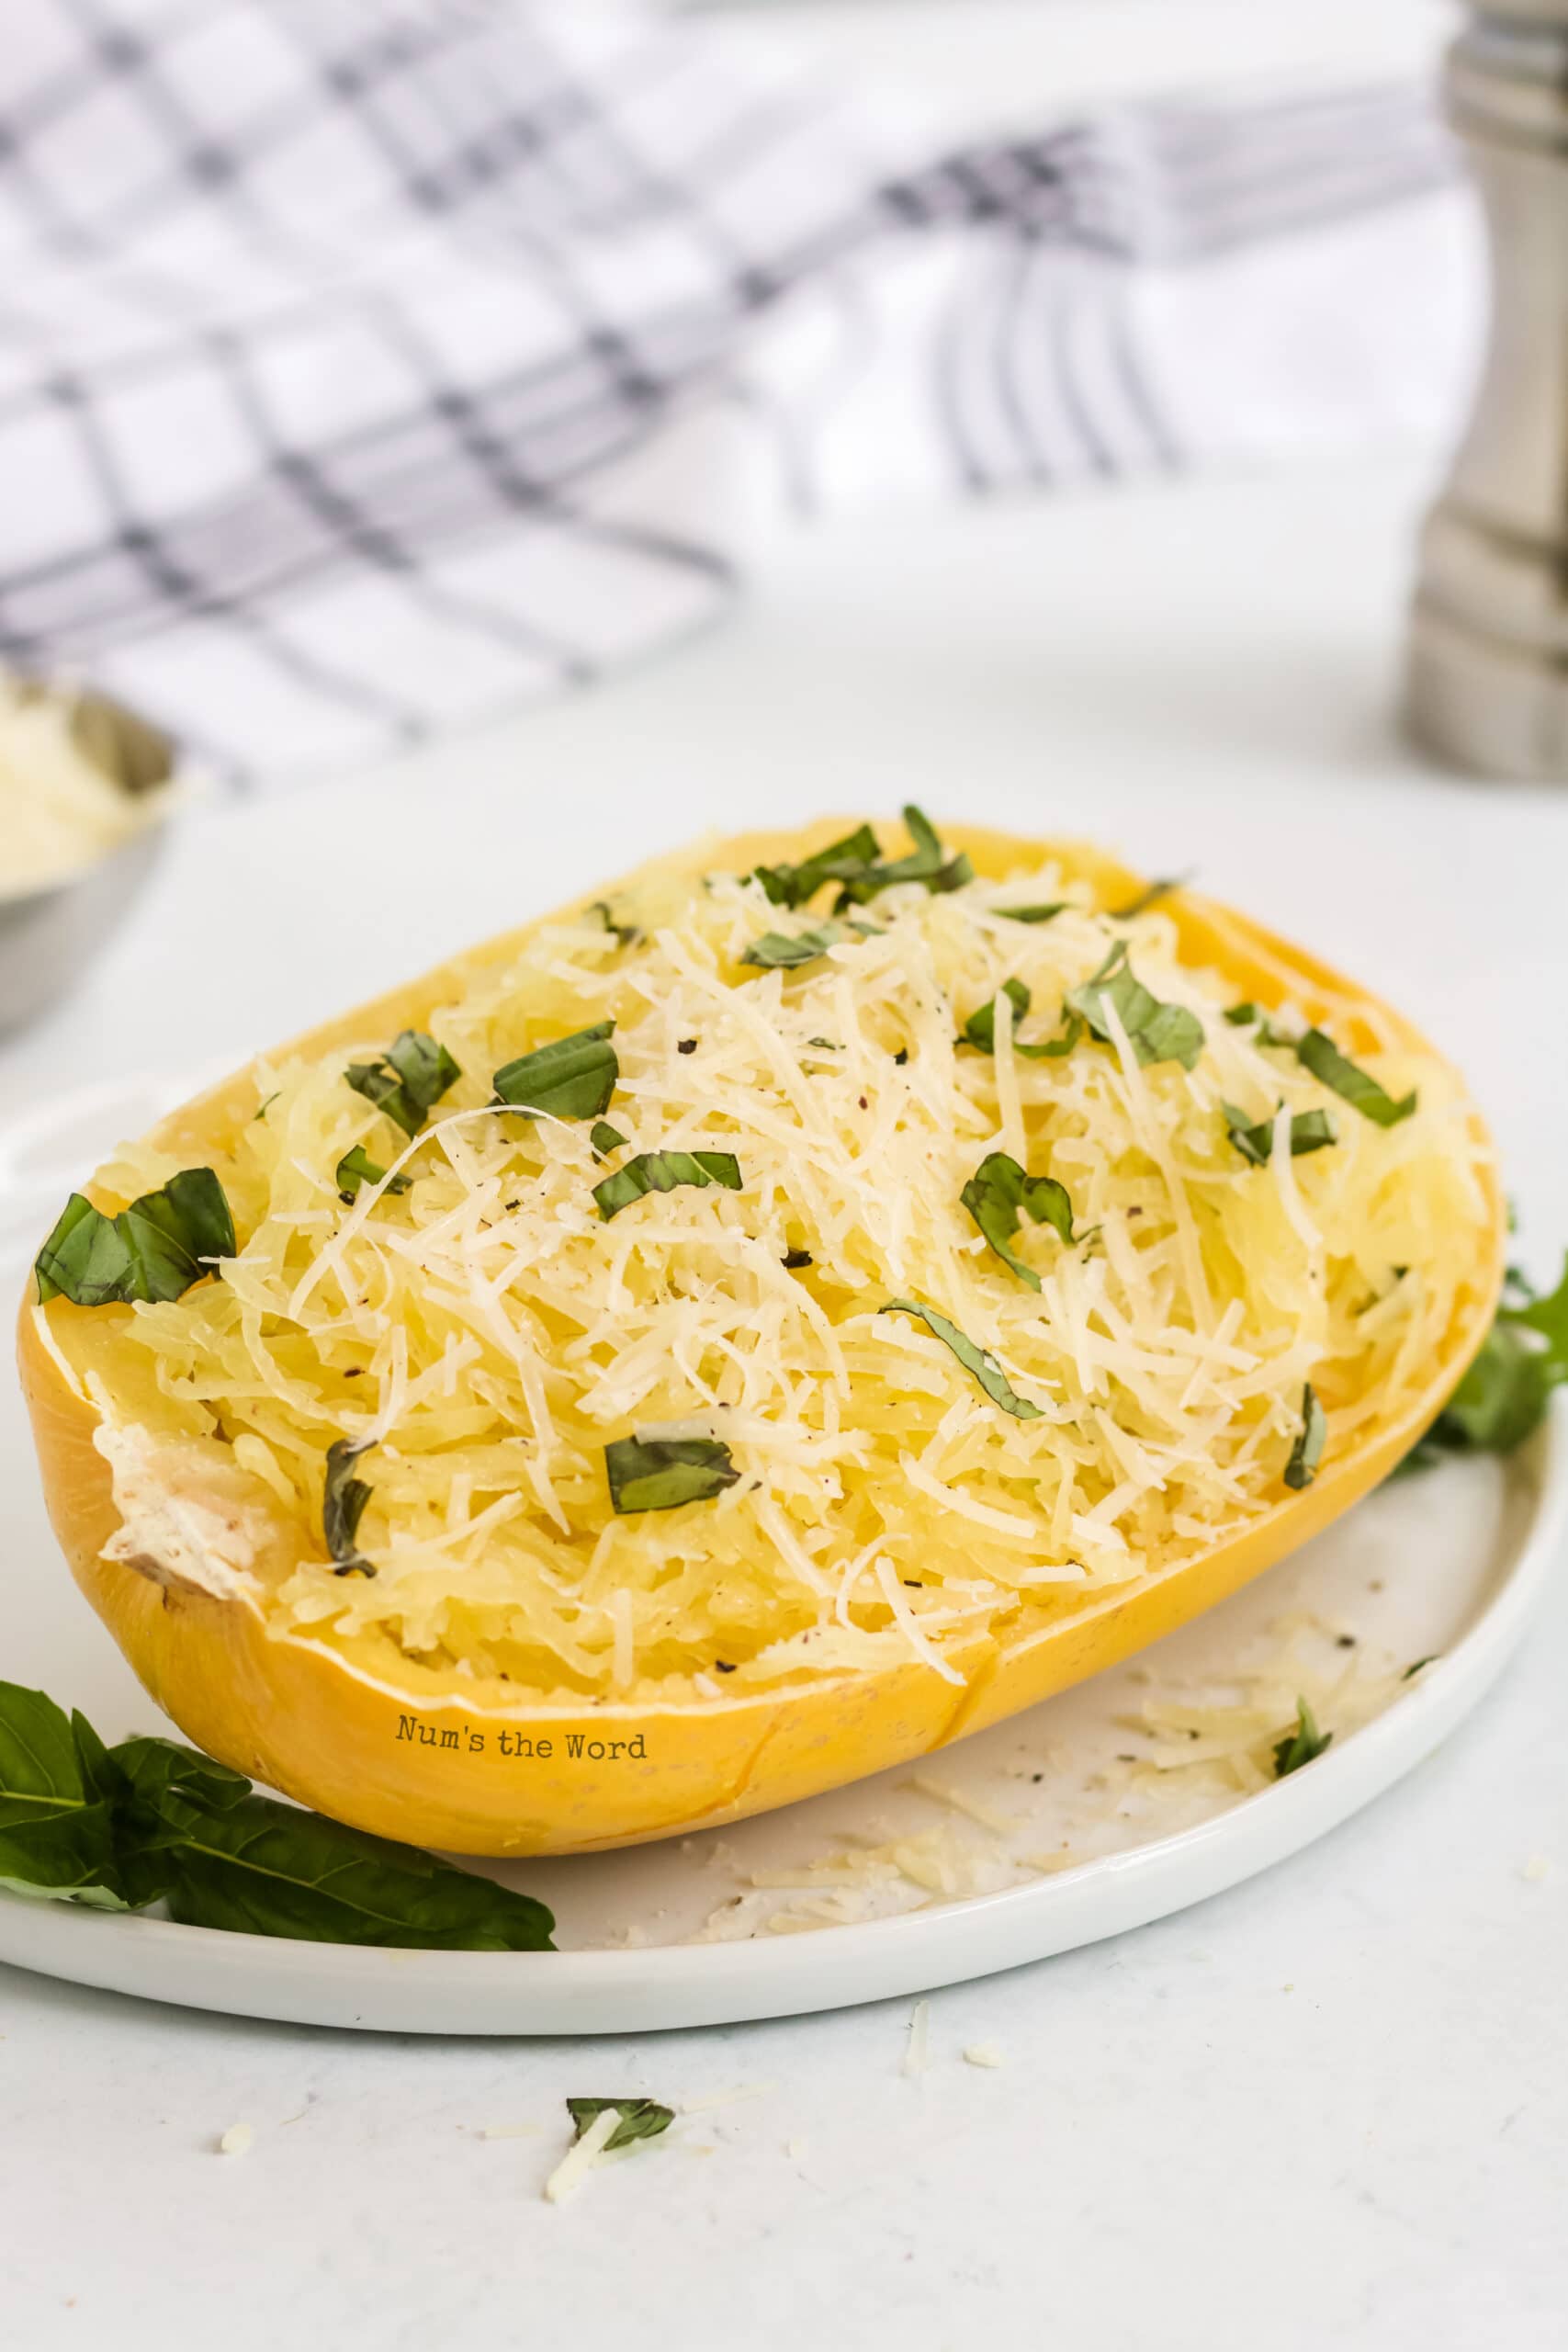 zoomed out image of half a spaghetti squash ready to be eaten.